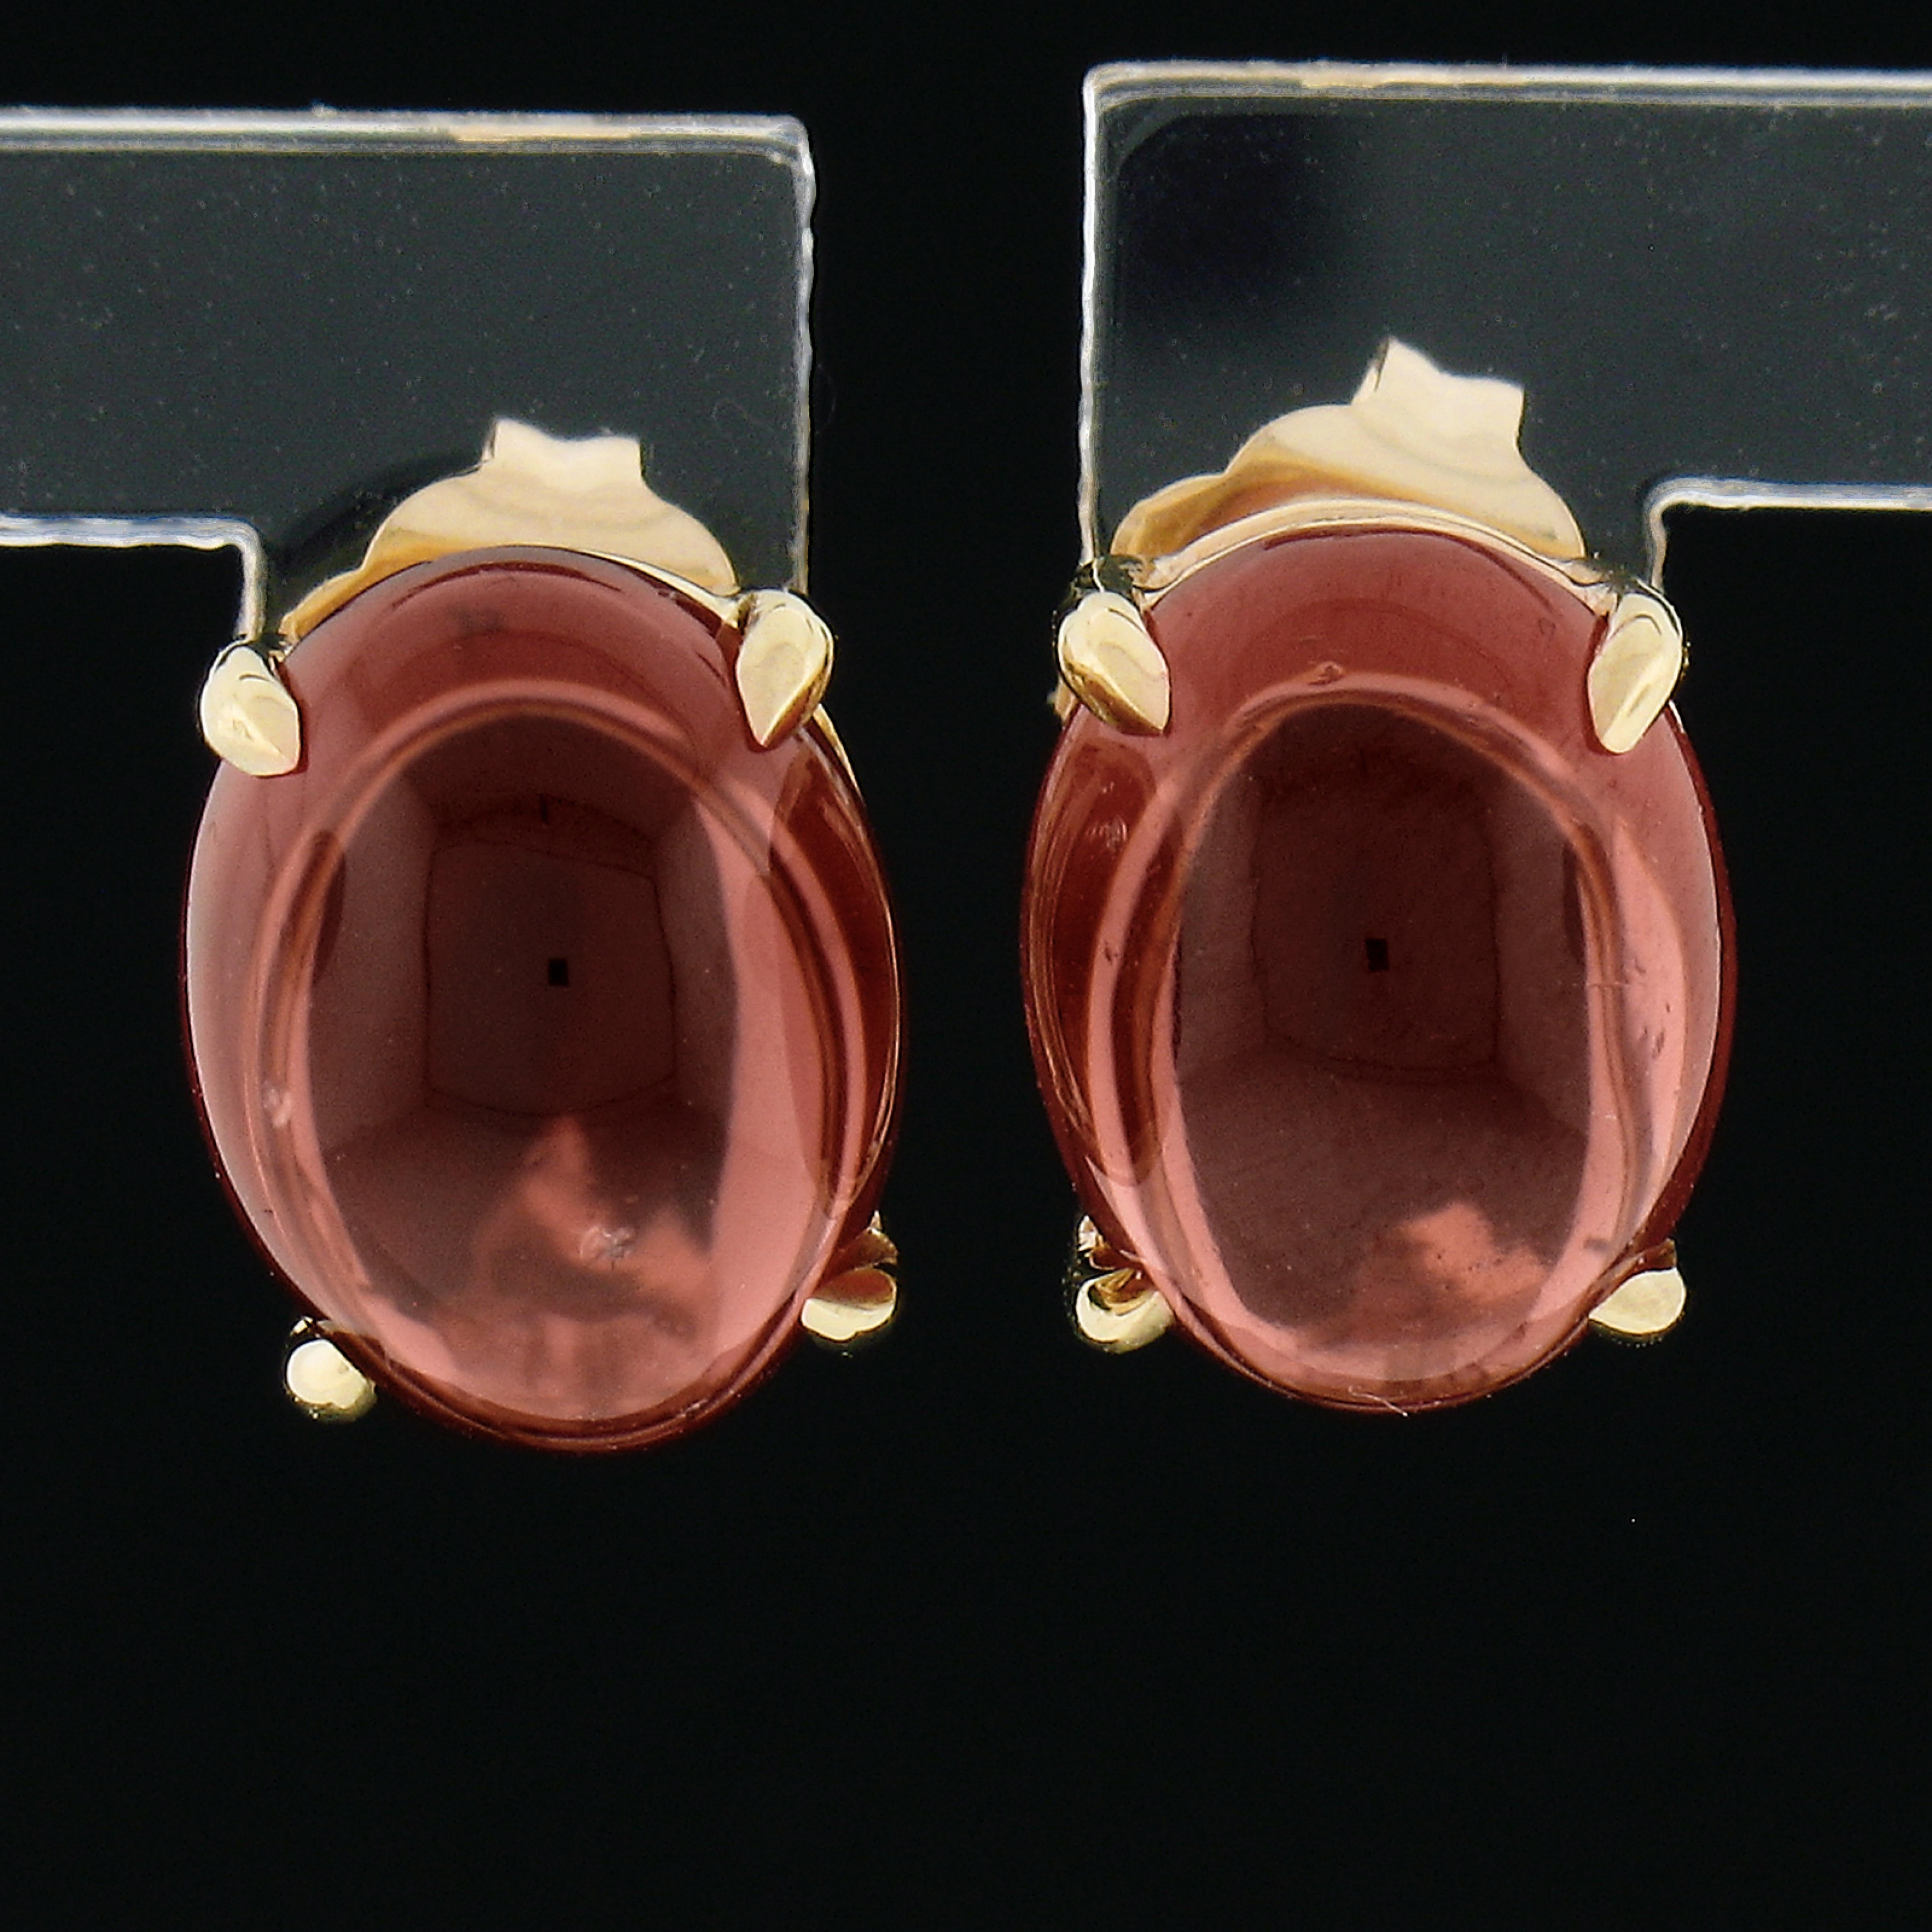 This gorgeous pair of earrings is crafted in solid 14k yellow gold and set with oval cabochon cut natural garnet stones. These beautiful deep brownish red garnets are neatly claw-prong set on open oval baskets studs, and are secure with posts and